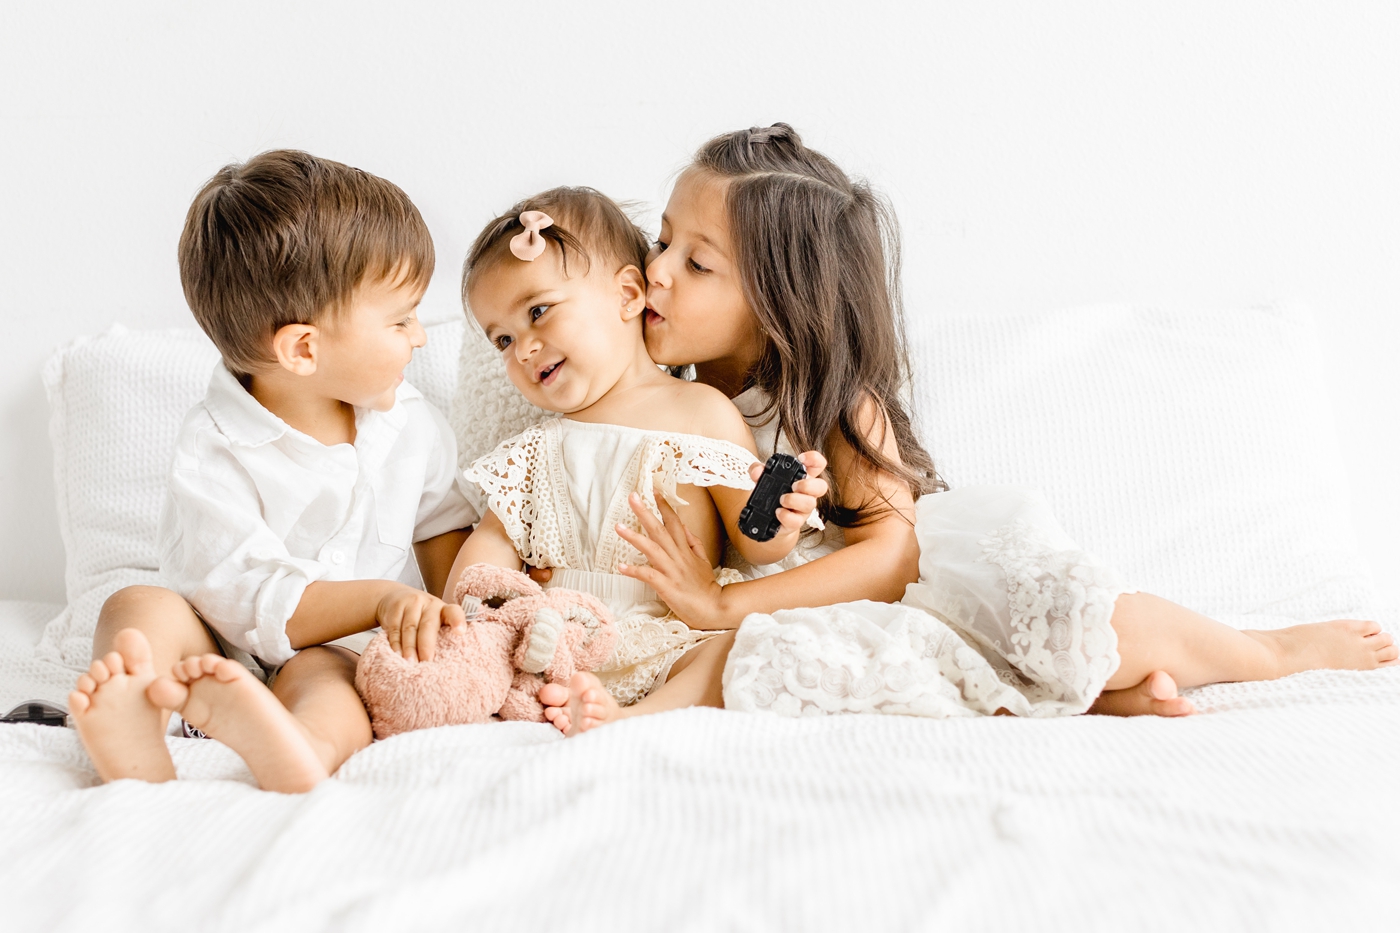 Sweet sibling image with three children sitting on studio bed. Photo by Austin family photographer, Sana Ahmed Photography.